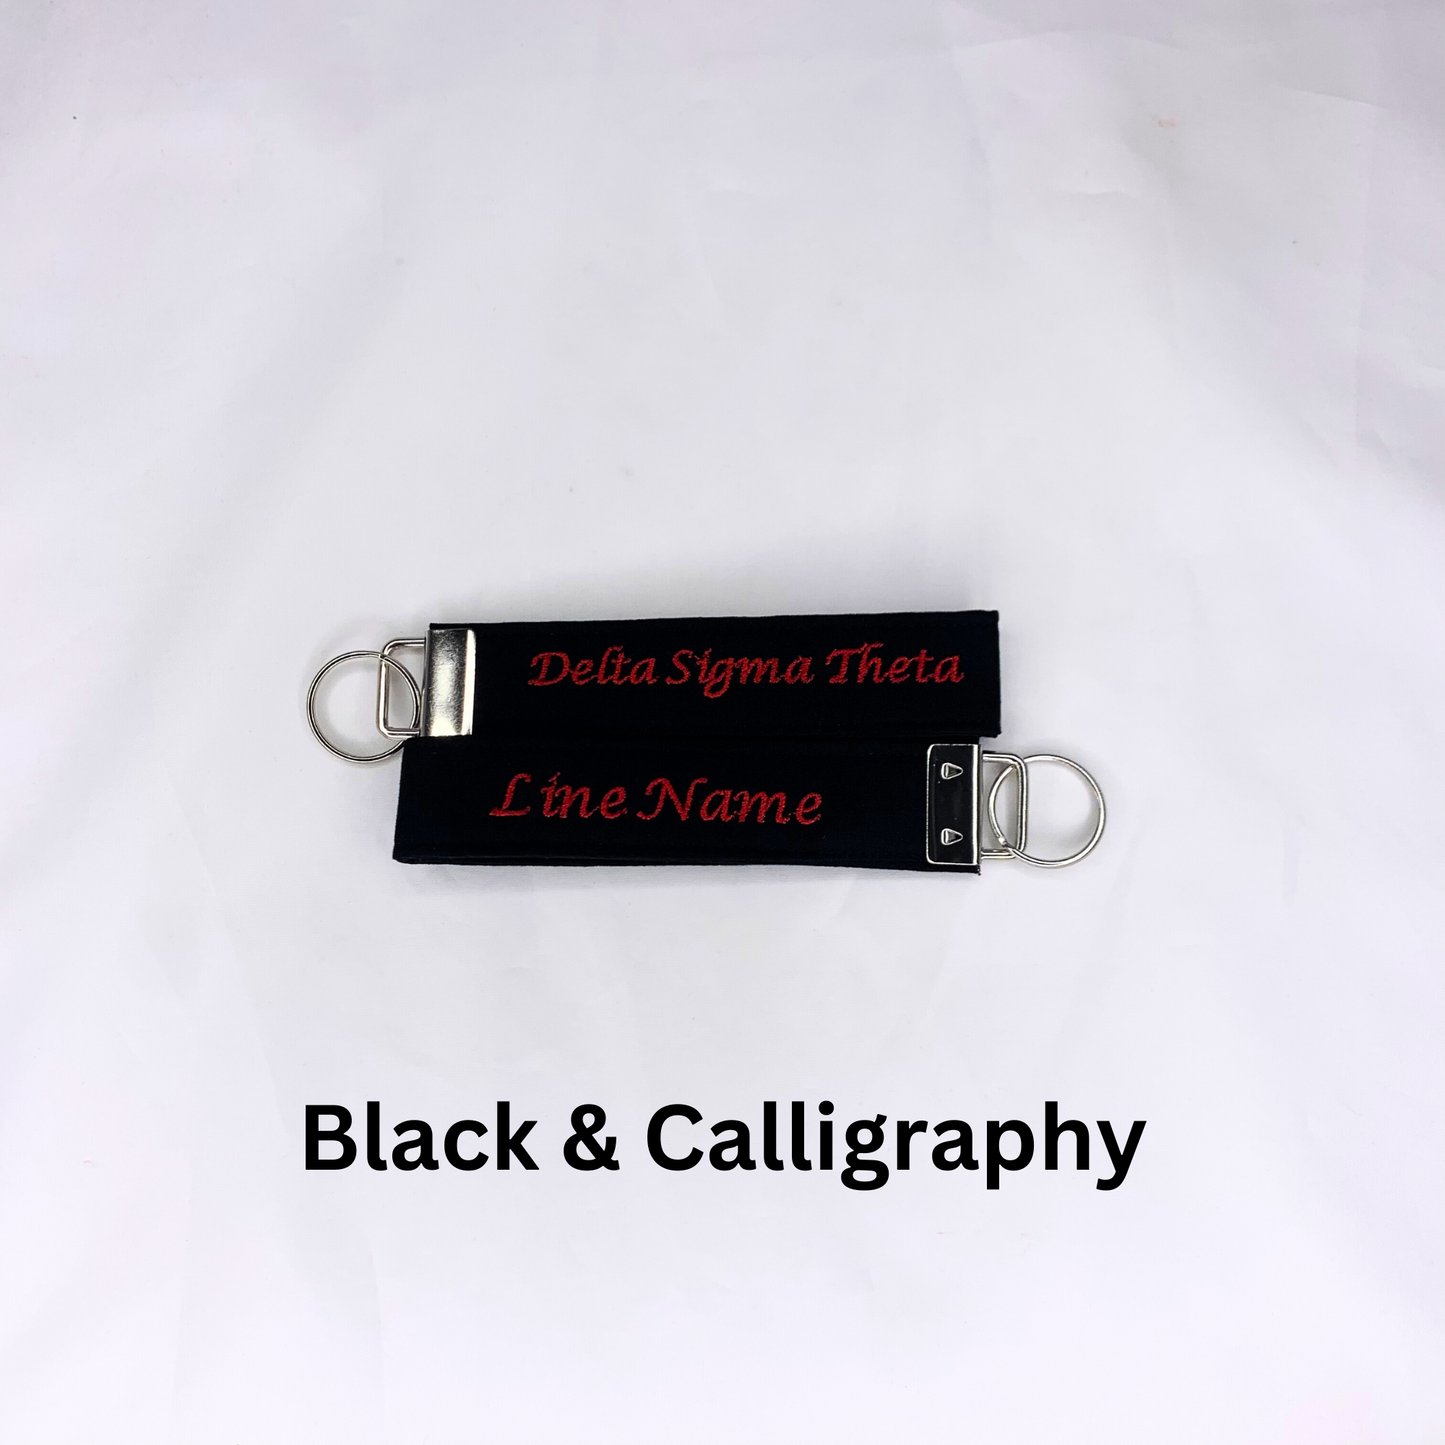 Delta Sigma Theta Red and White Personalized Embroidered Key fob